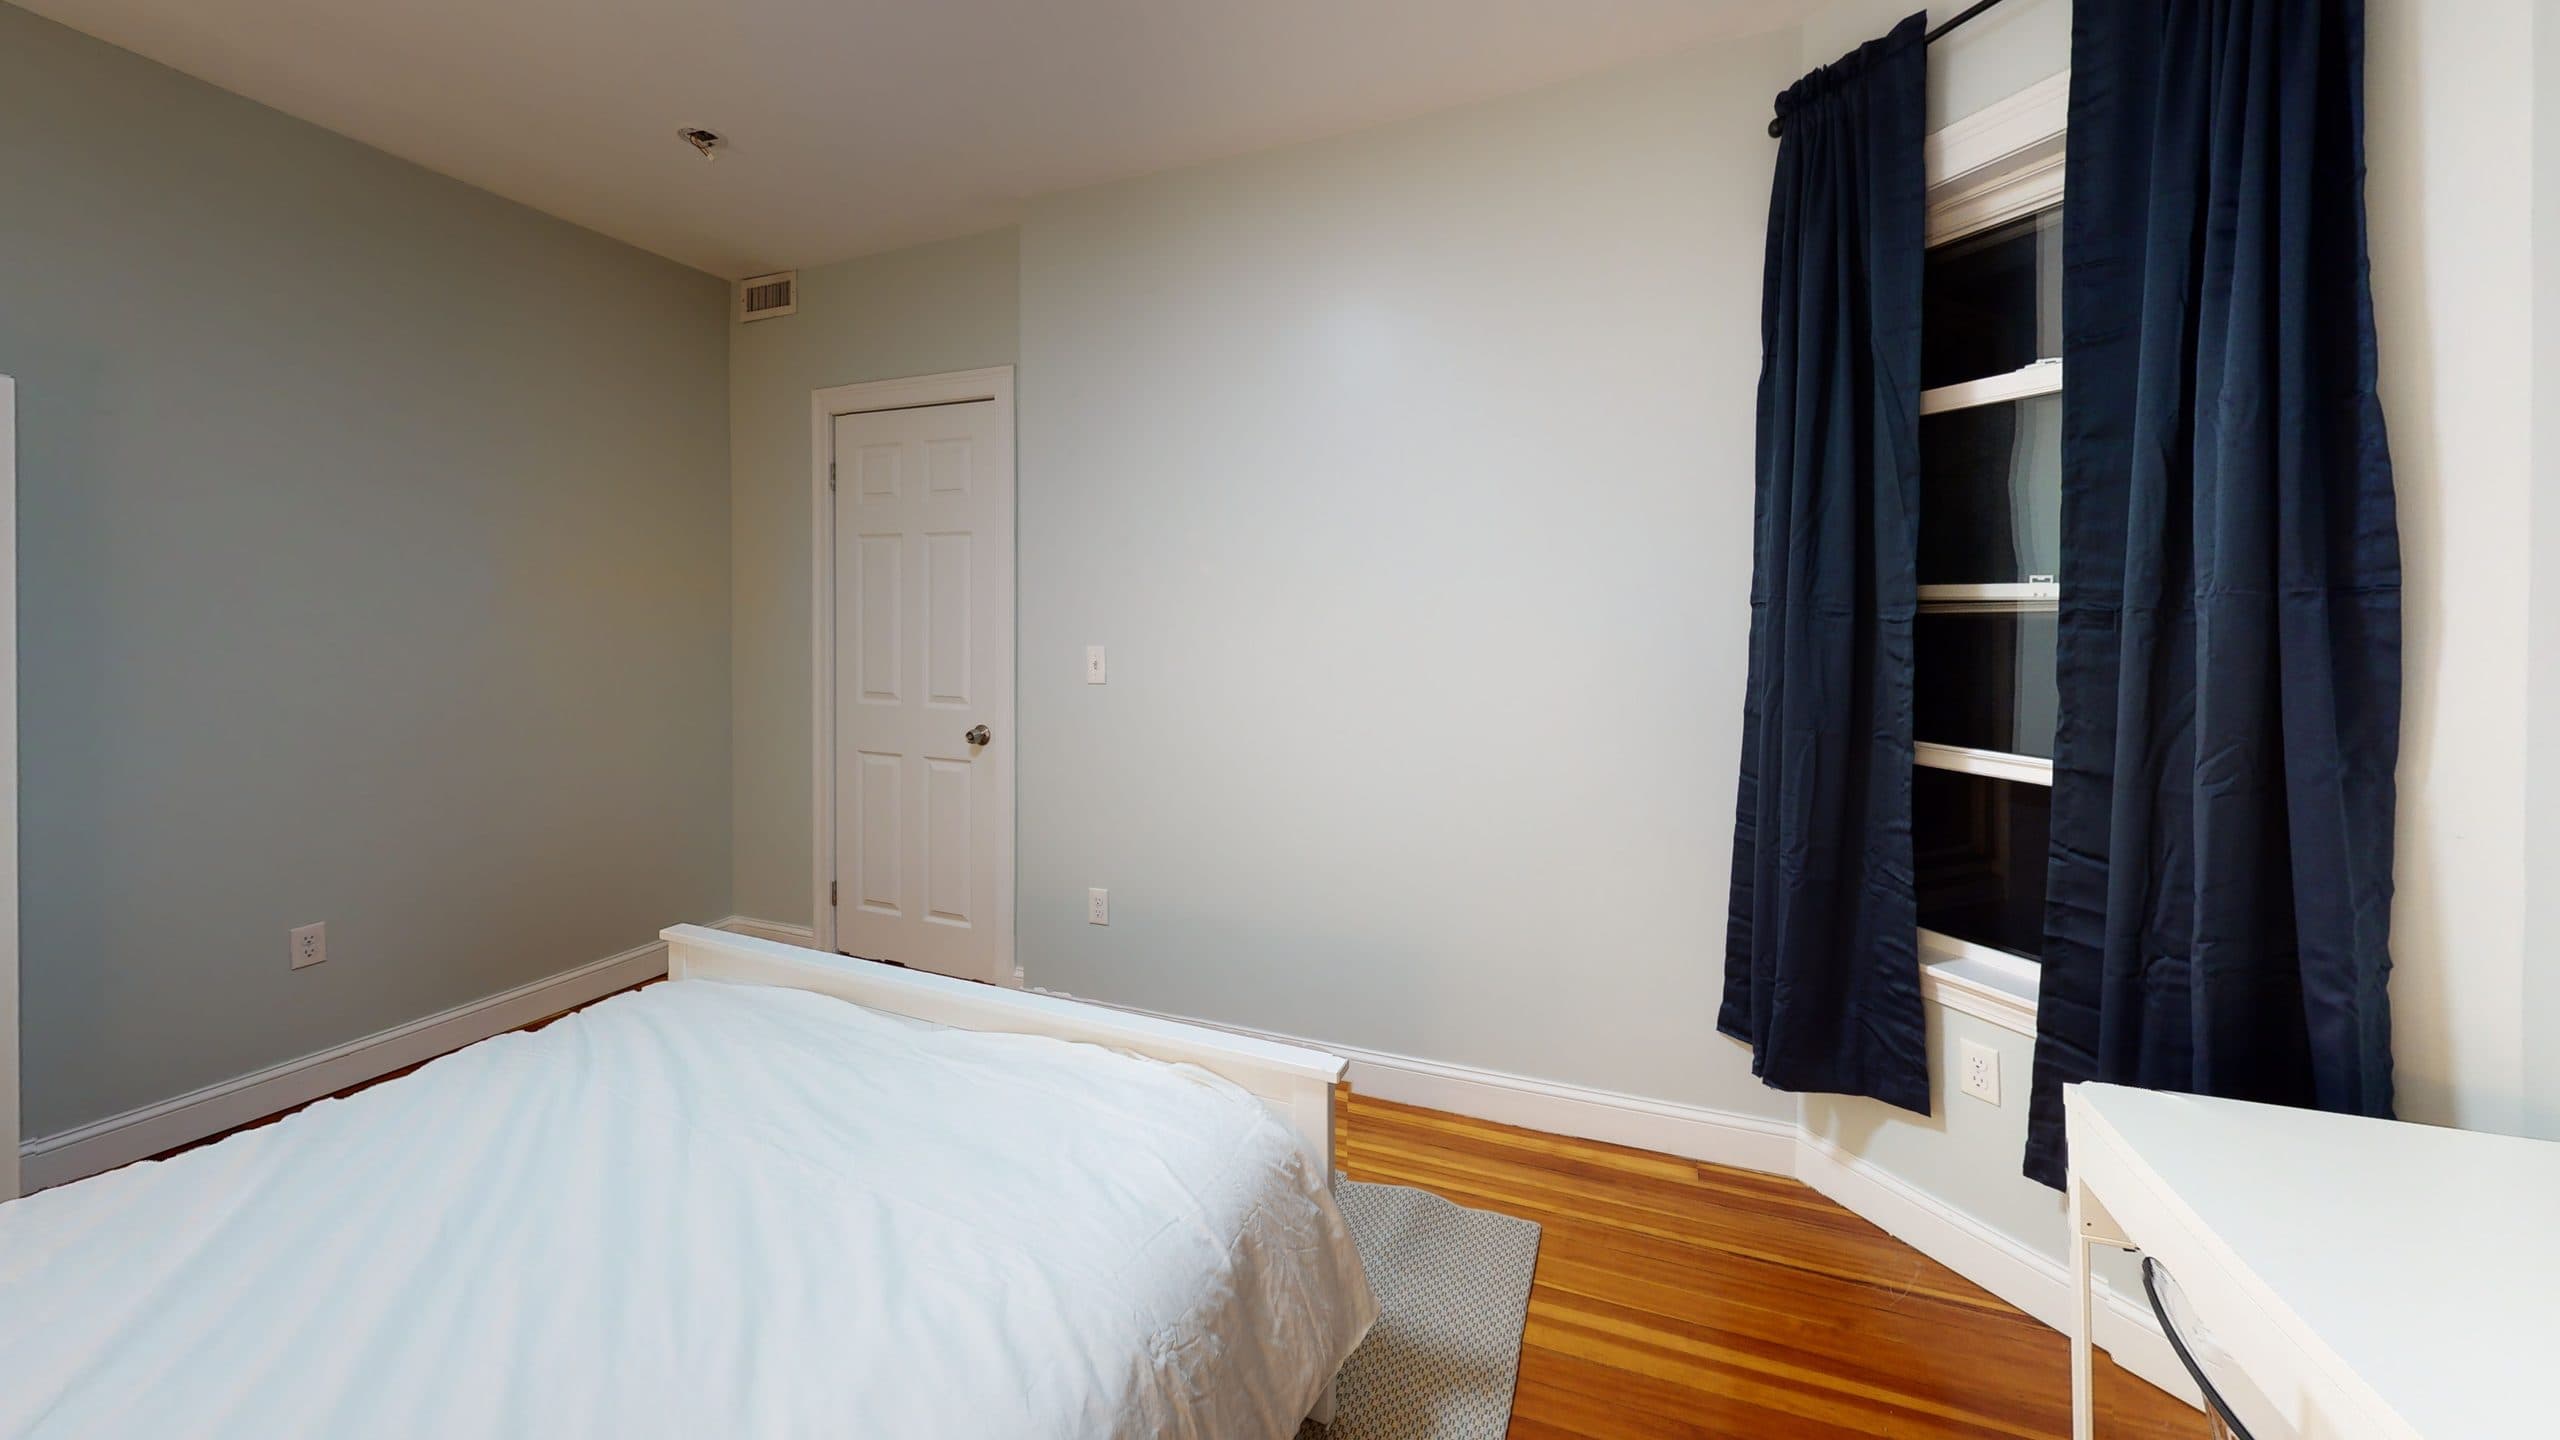 Photo 22 of #1575: Queen Bedroom A at June Homes